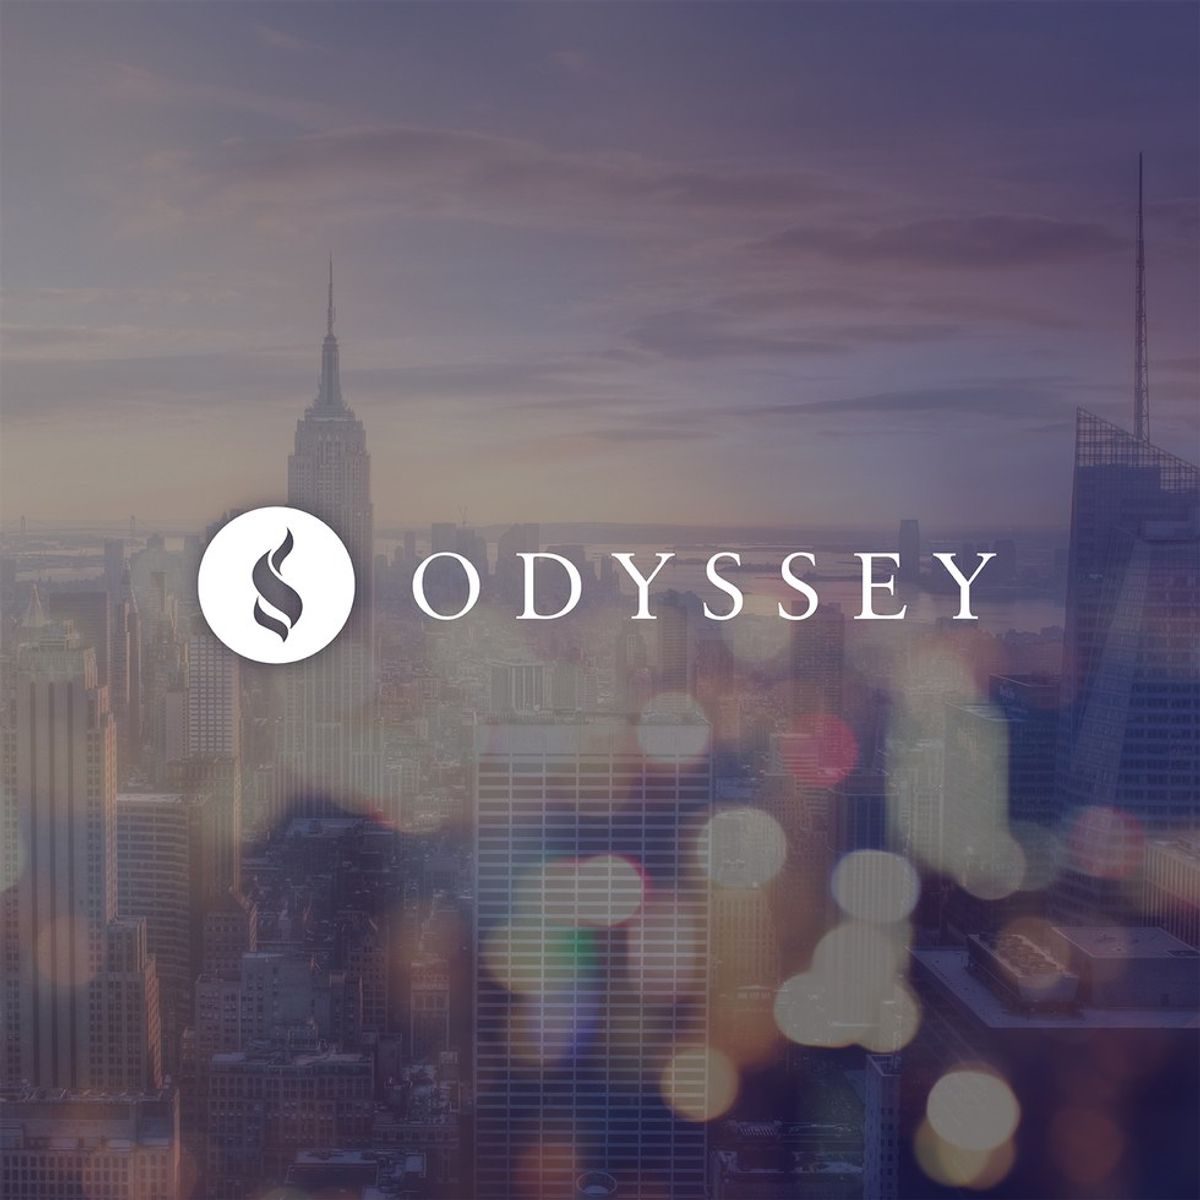 I'm An Odyssey Creator And The Modern Odyssey Bothers Me